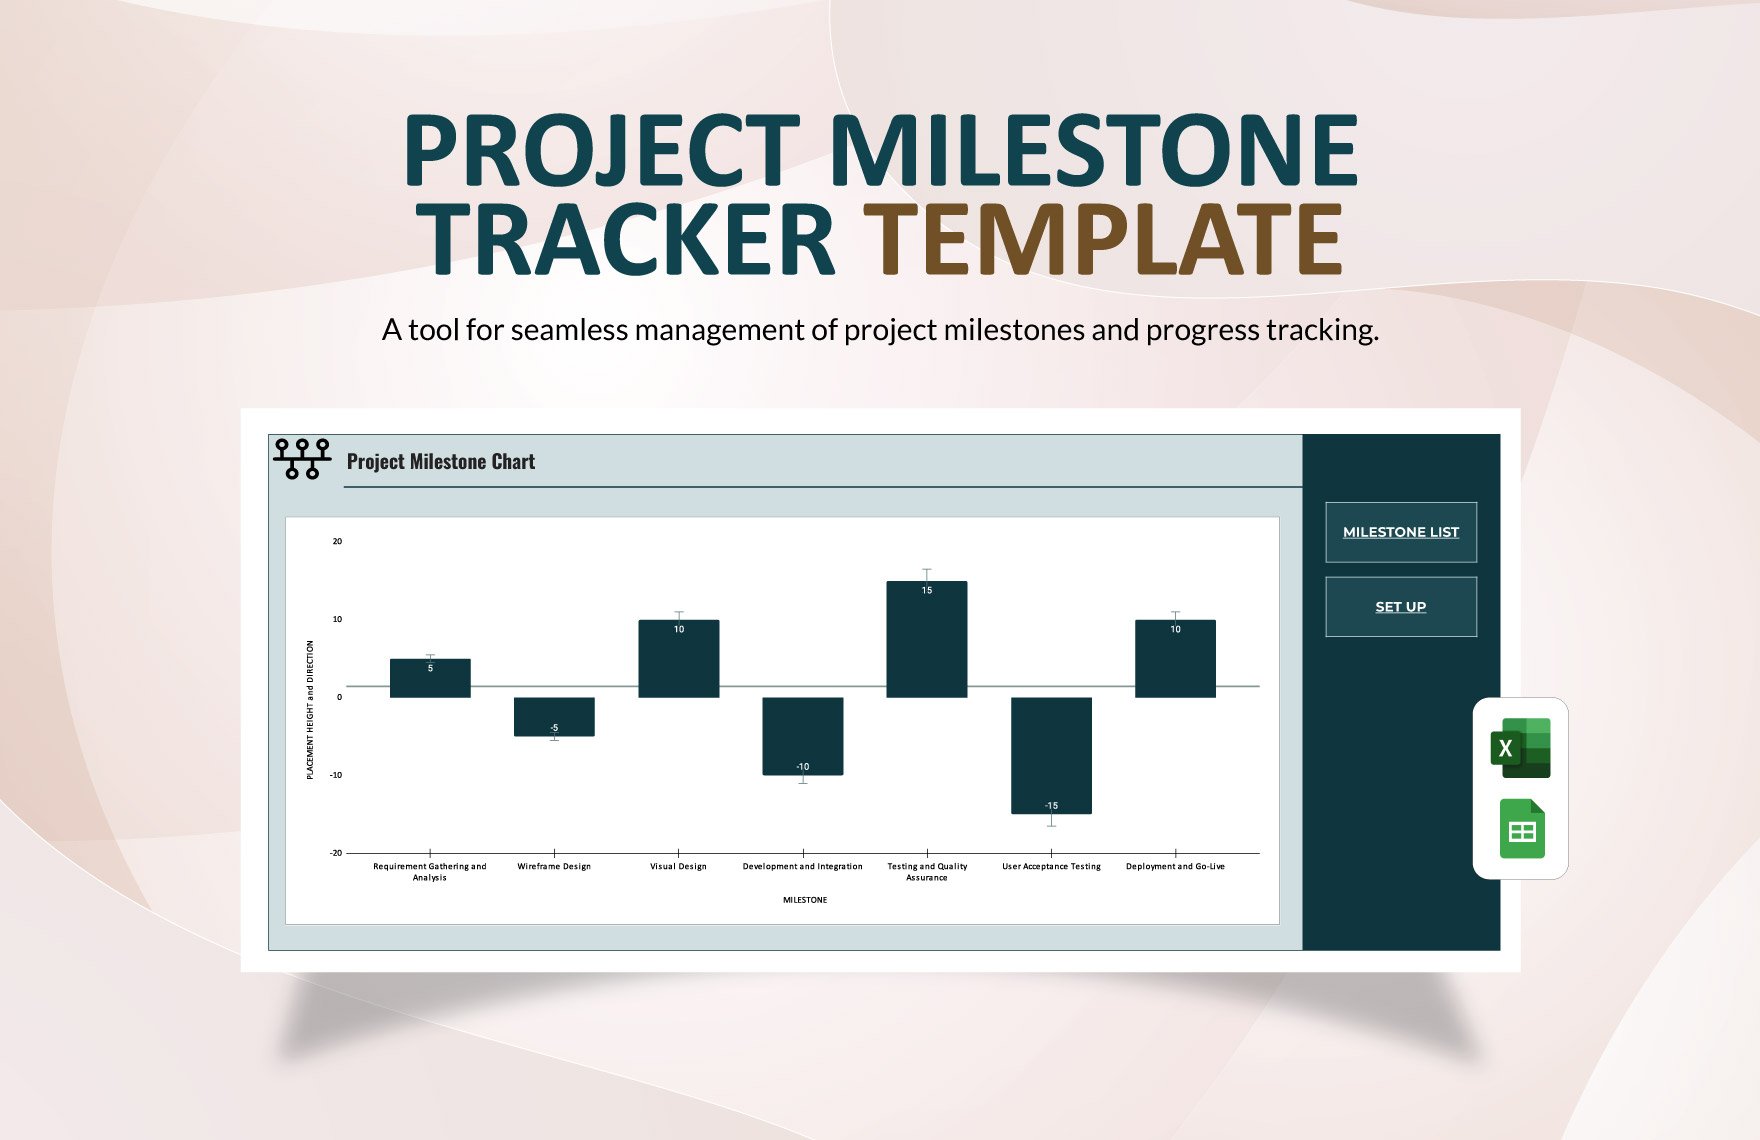 Project Milestone Tracker Template in Excel, Google Sheets